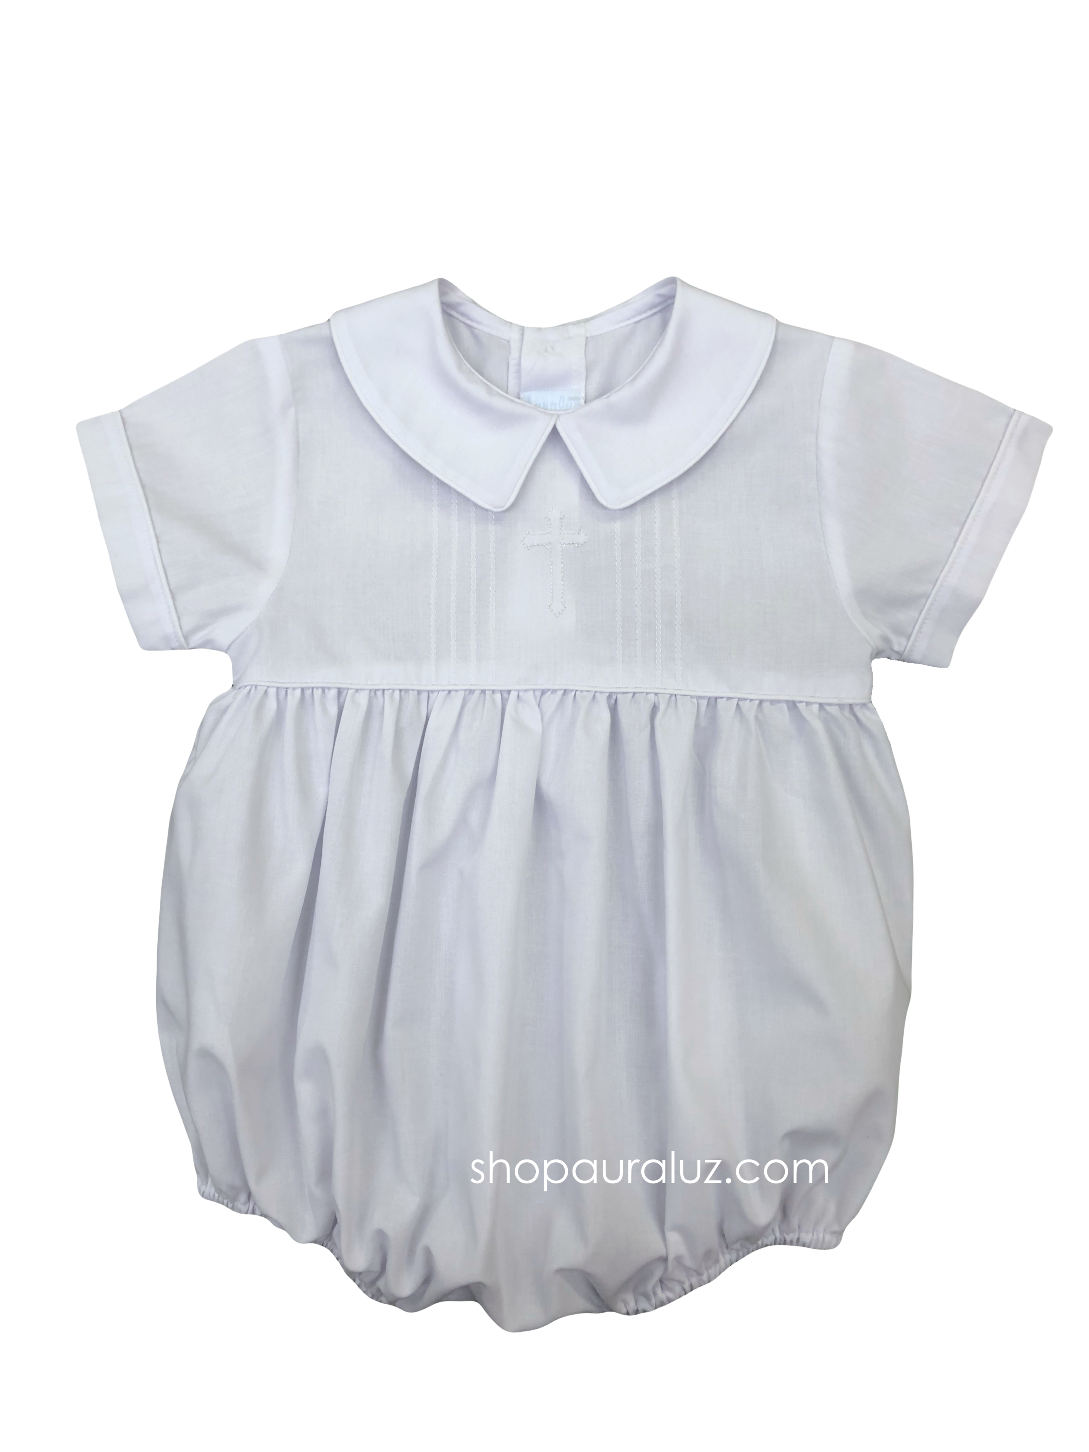 Auraluz Boy Bubble...White with boy collar, tucks and embroidered cross